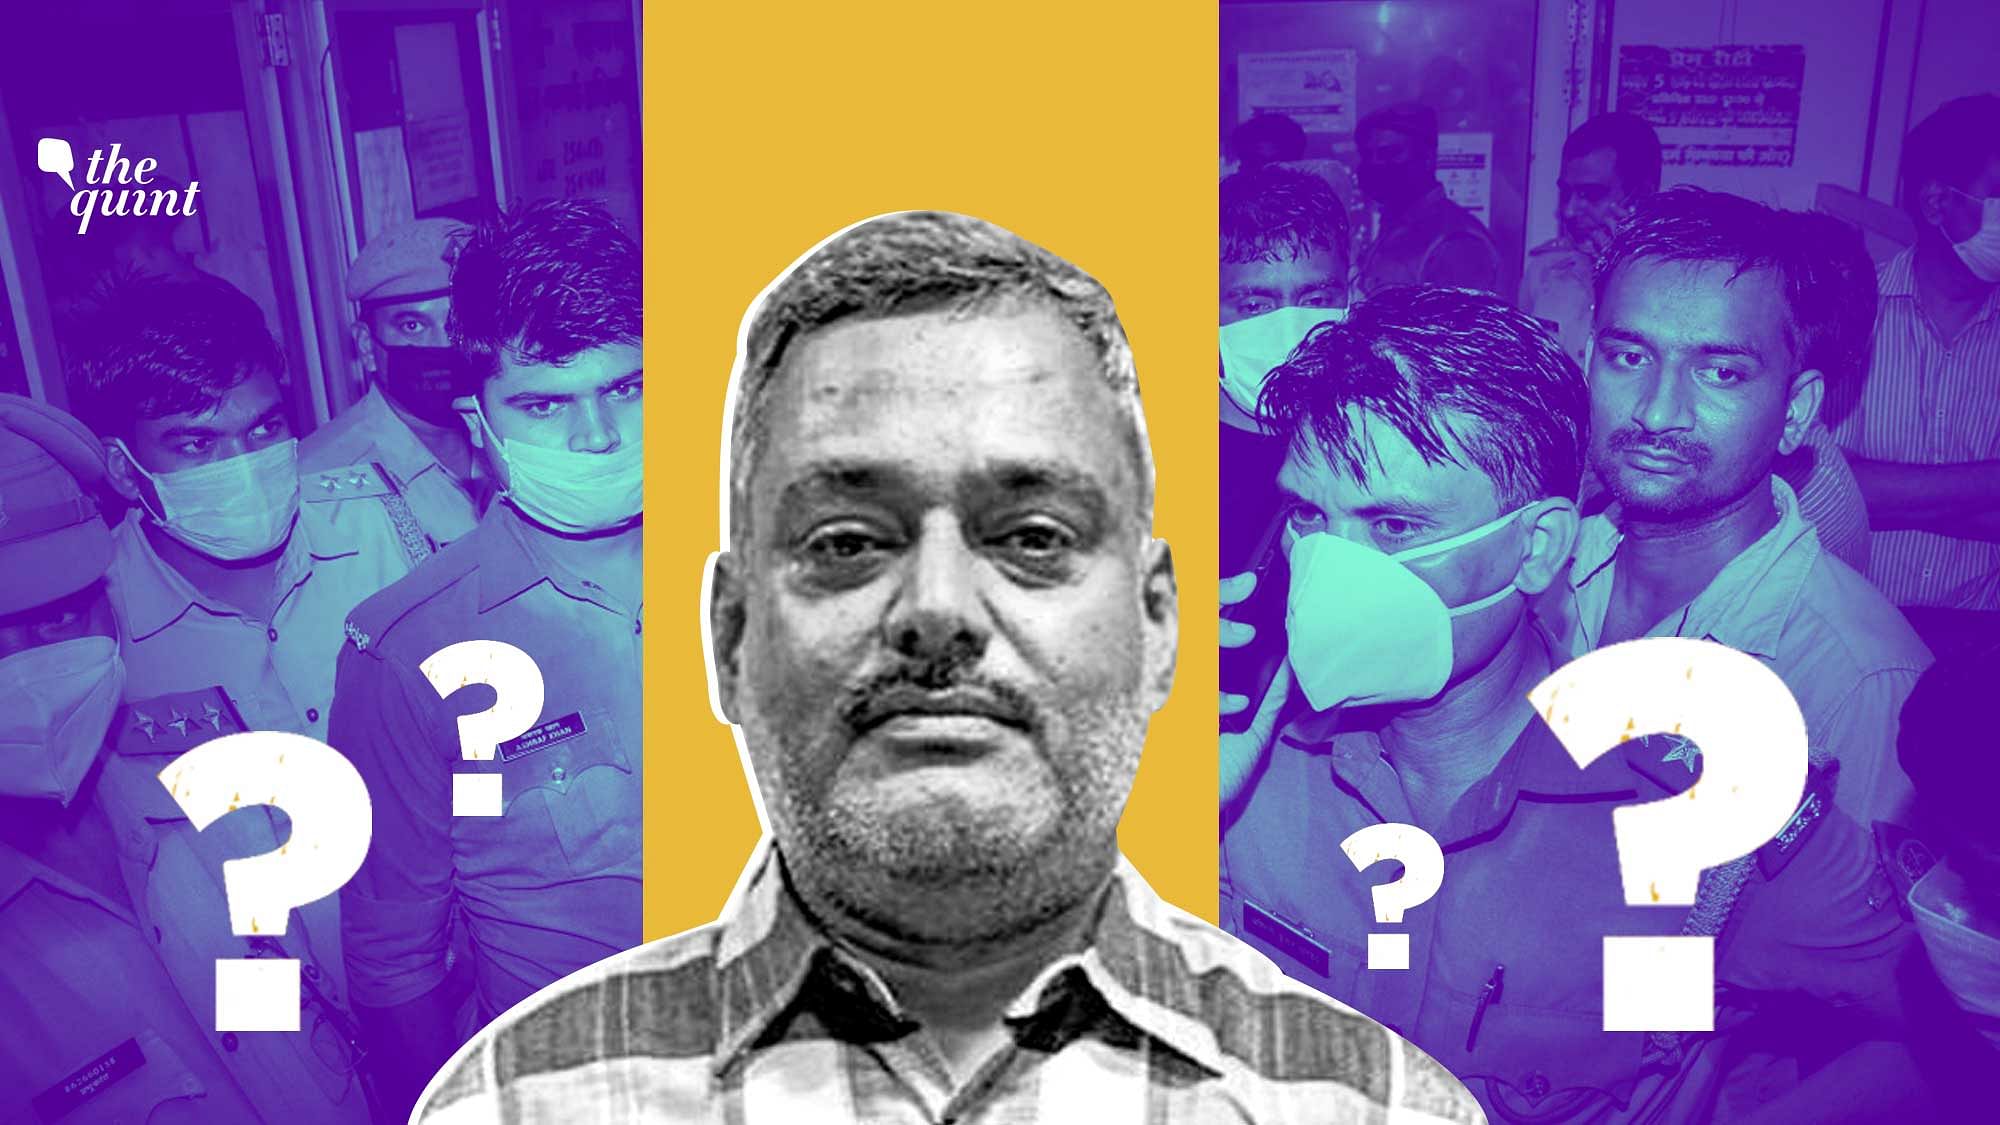 UP gangster Vikas Dubey is the prime accused in the encounter and ambush in Kanpur that left 8 cops dead last week.